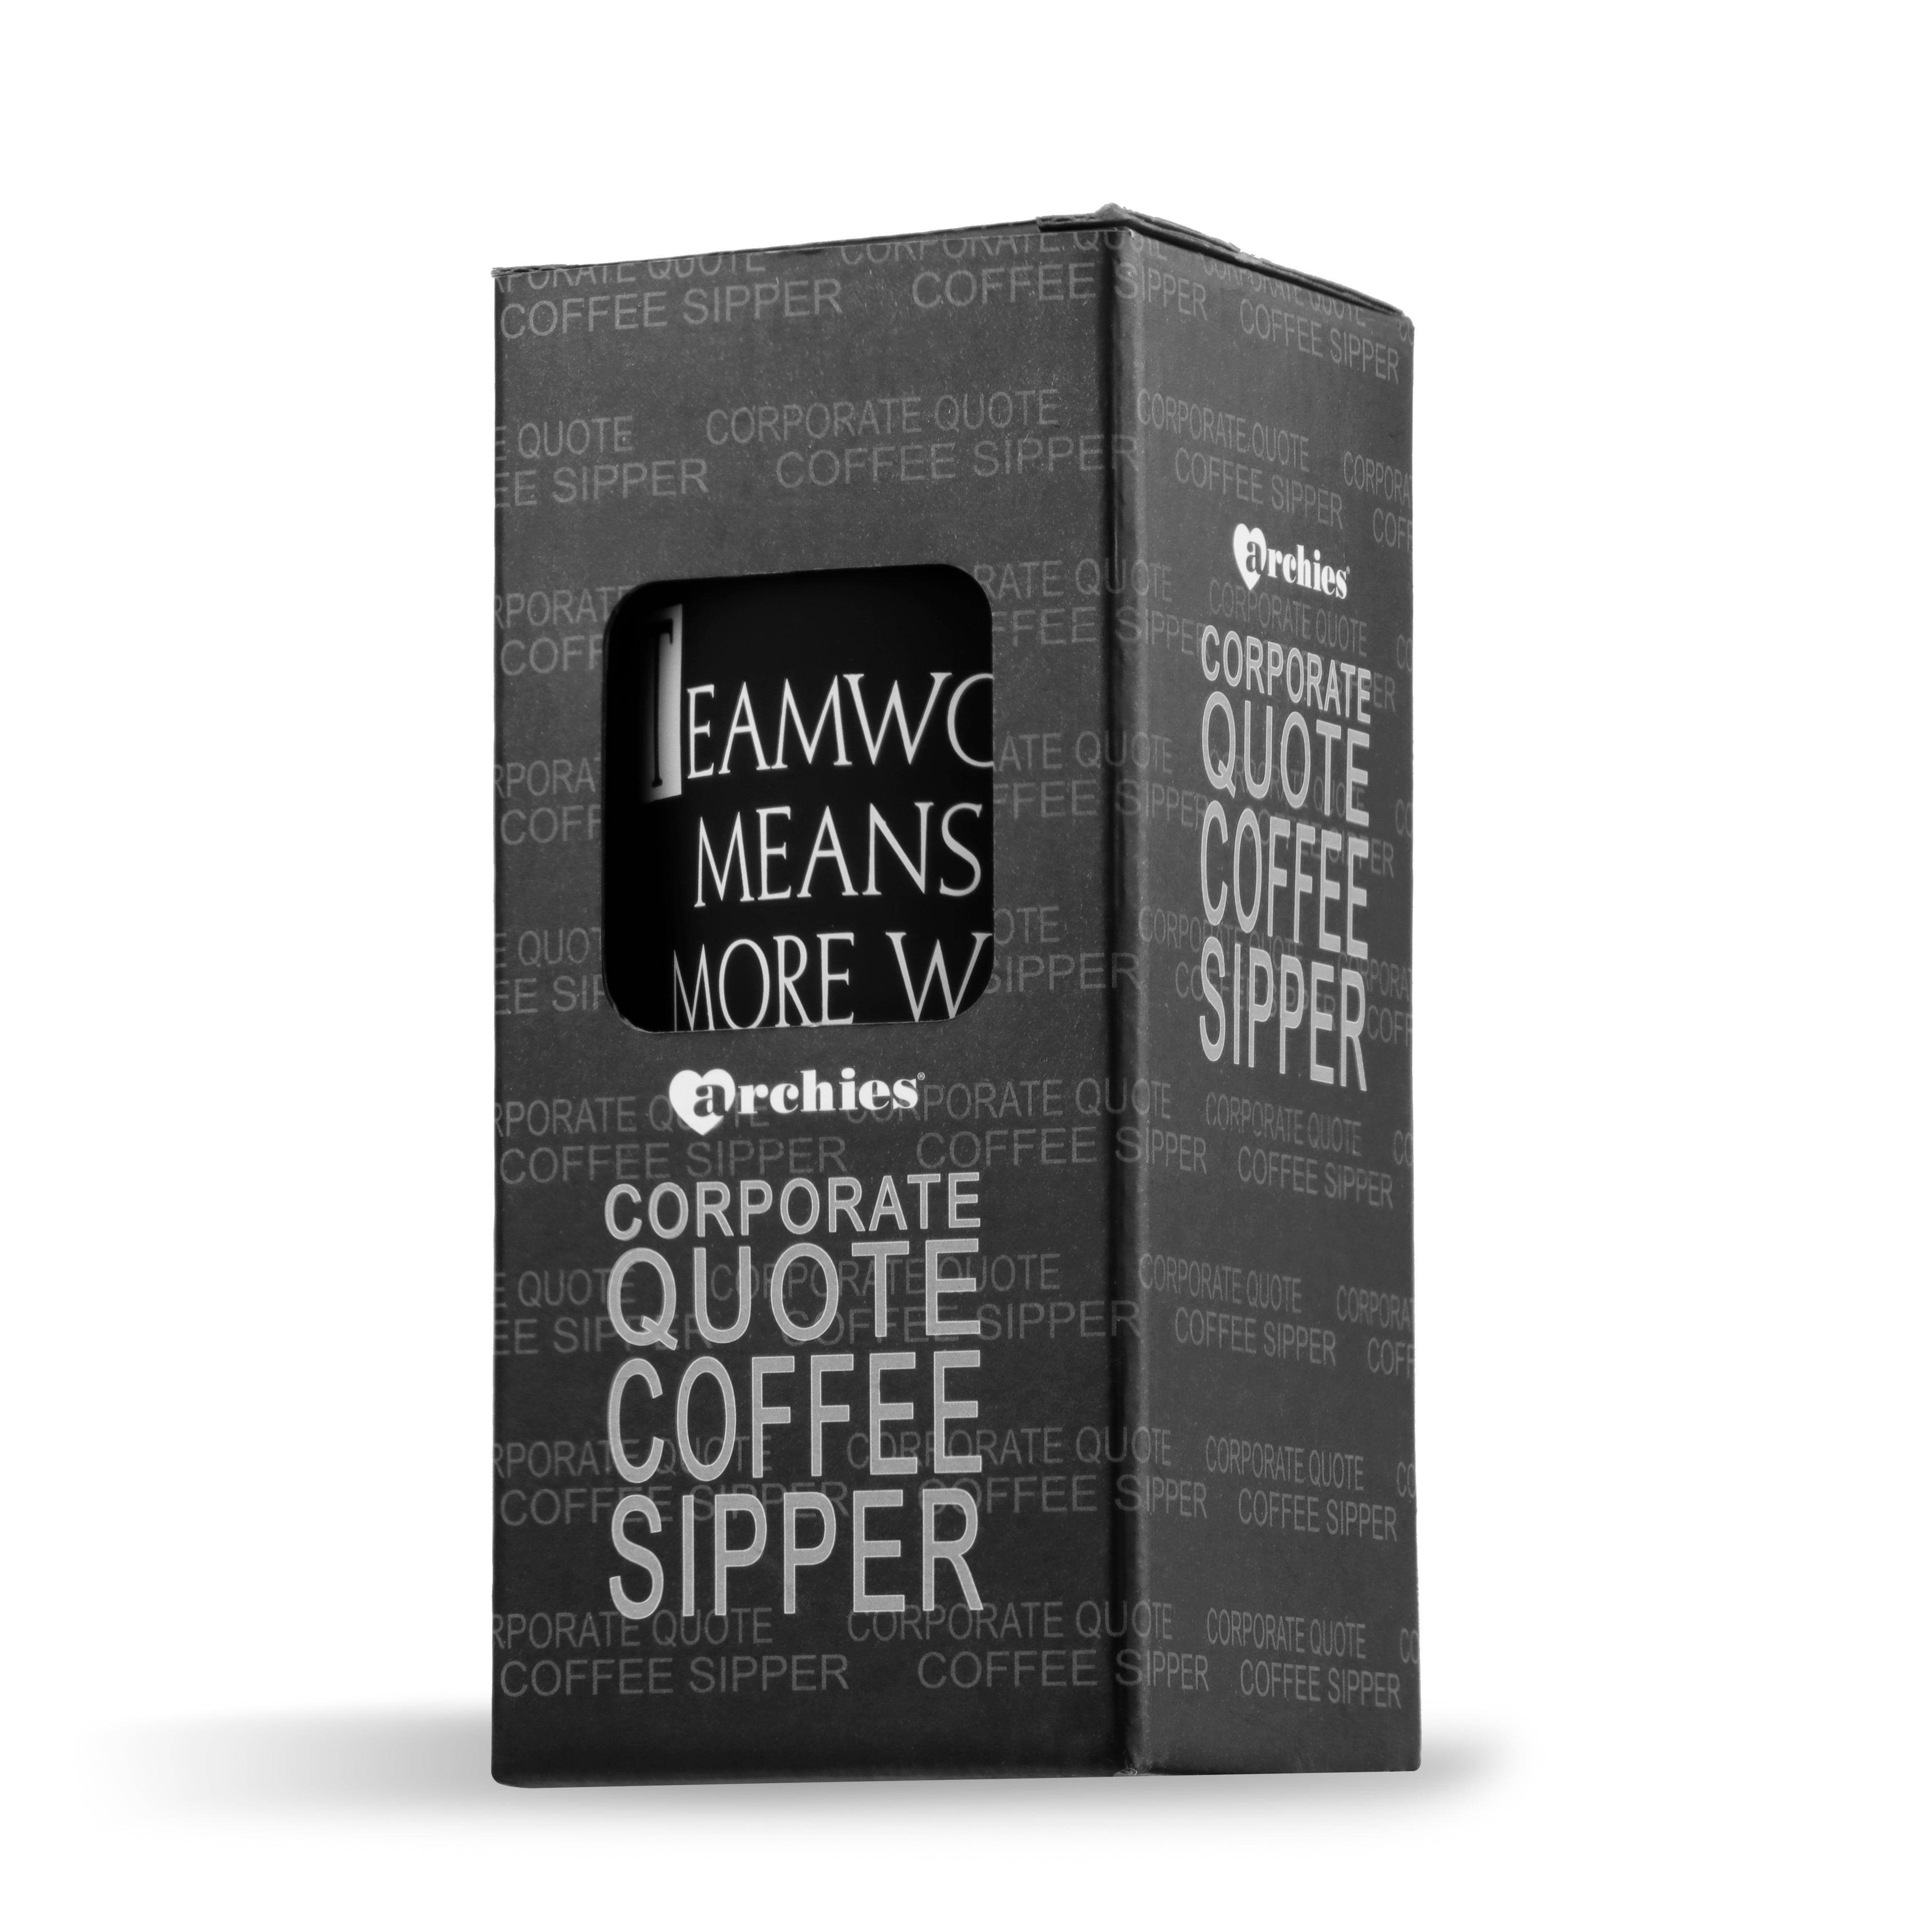 Archies | Archies Printed Stainless Steel Sipper/Shaker & Notebook combo with Corporate Quote Theme 3